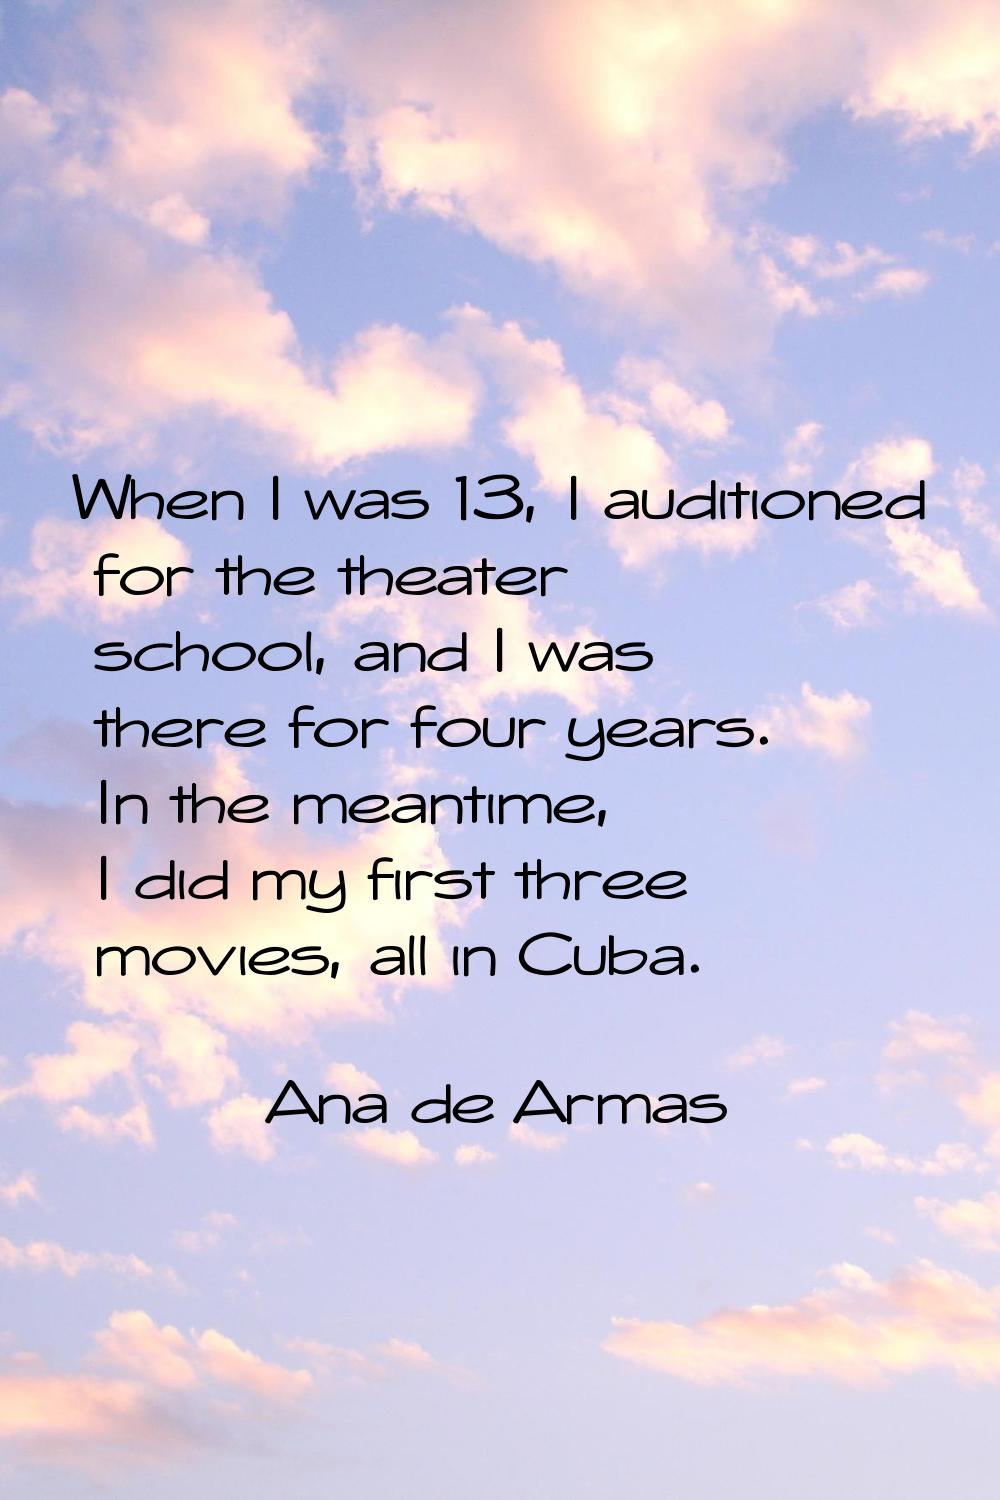 When I was 13, I auditioned for the theater school, and I was there for four years. In the meantime